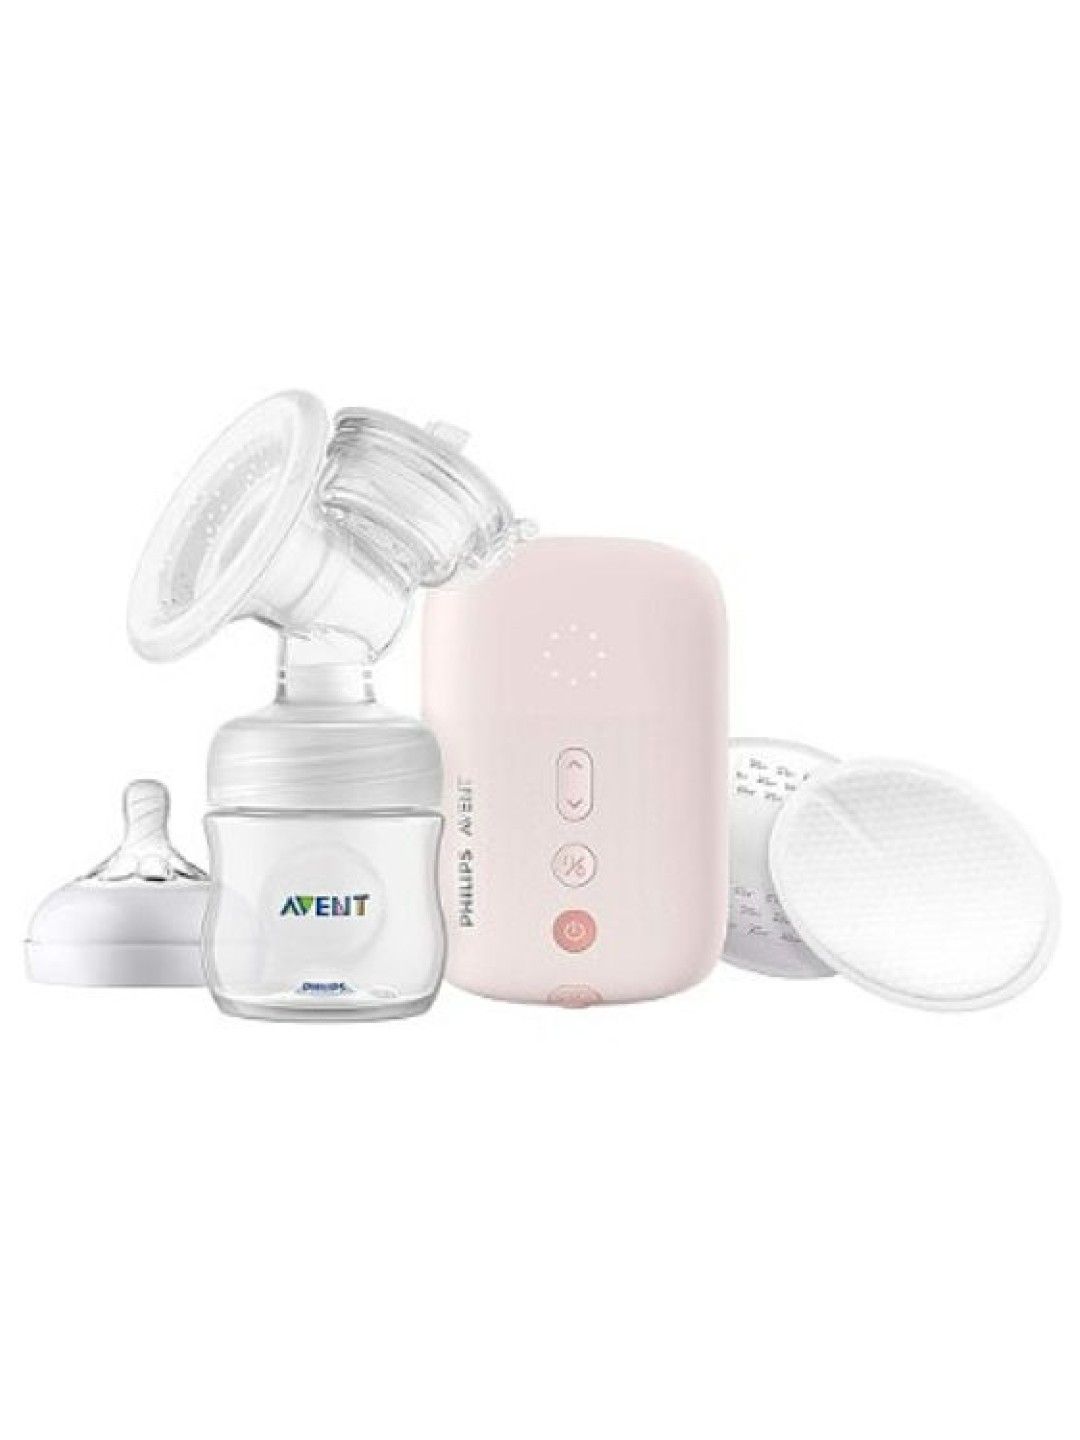 Avent Philips AVENT Single Electric Breast Pump Plus